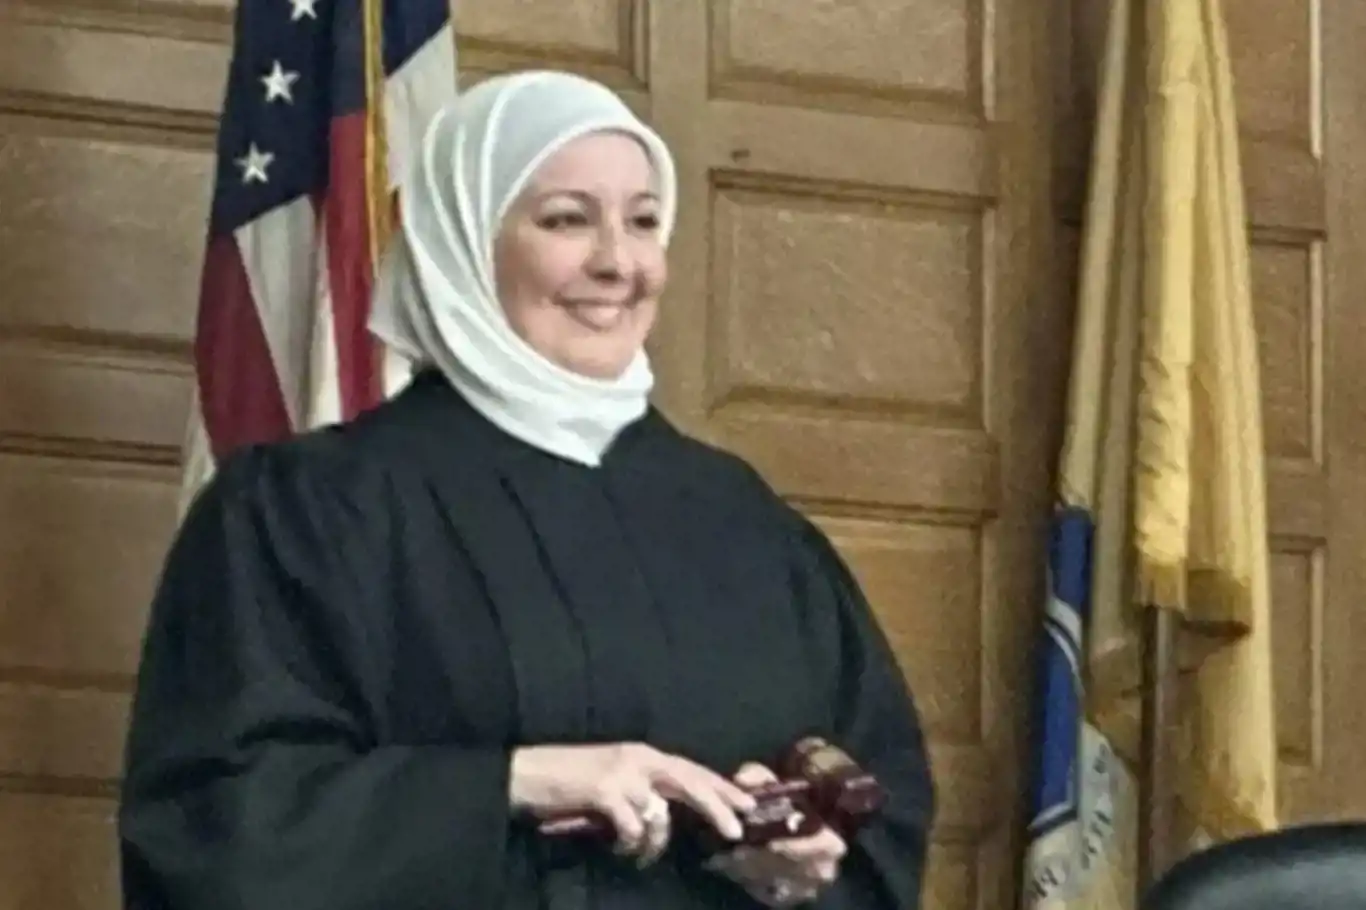 First headscarf-wearing judge takes oath in United States